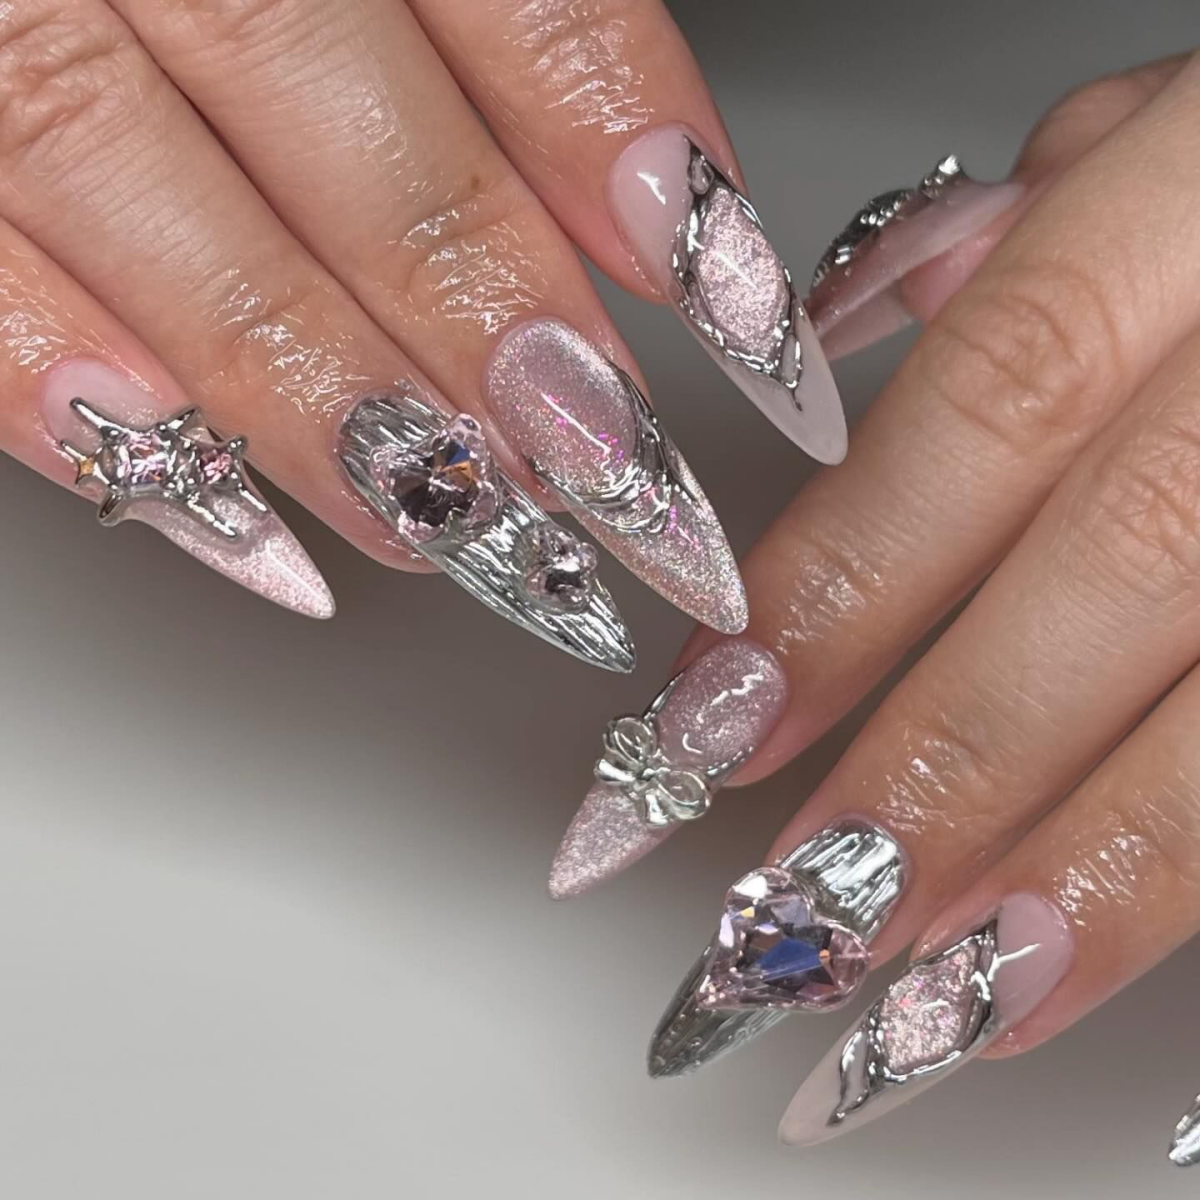 pink fituristic nails with silver chrome accents